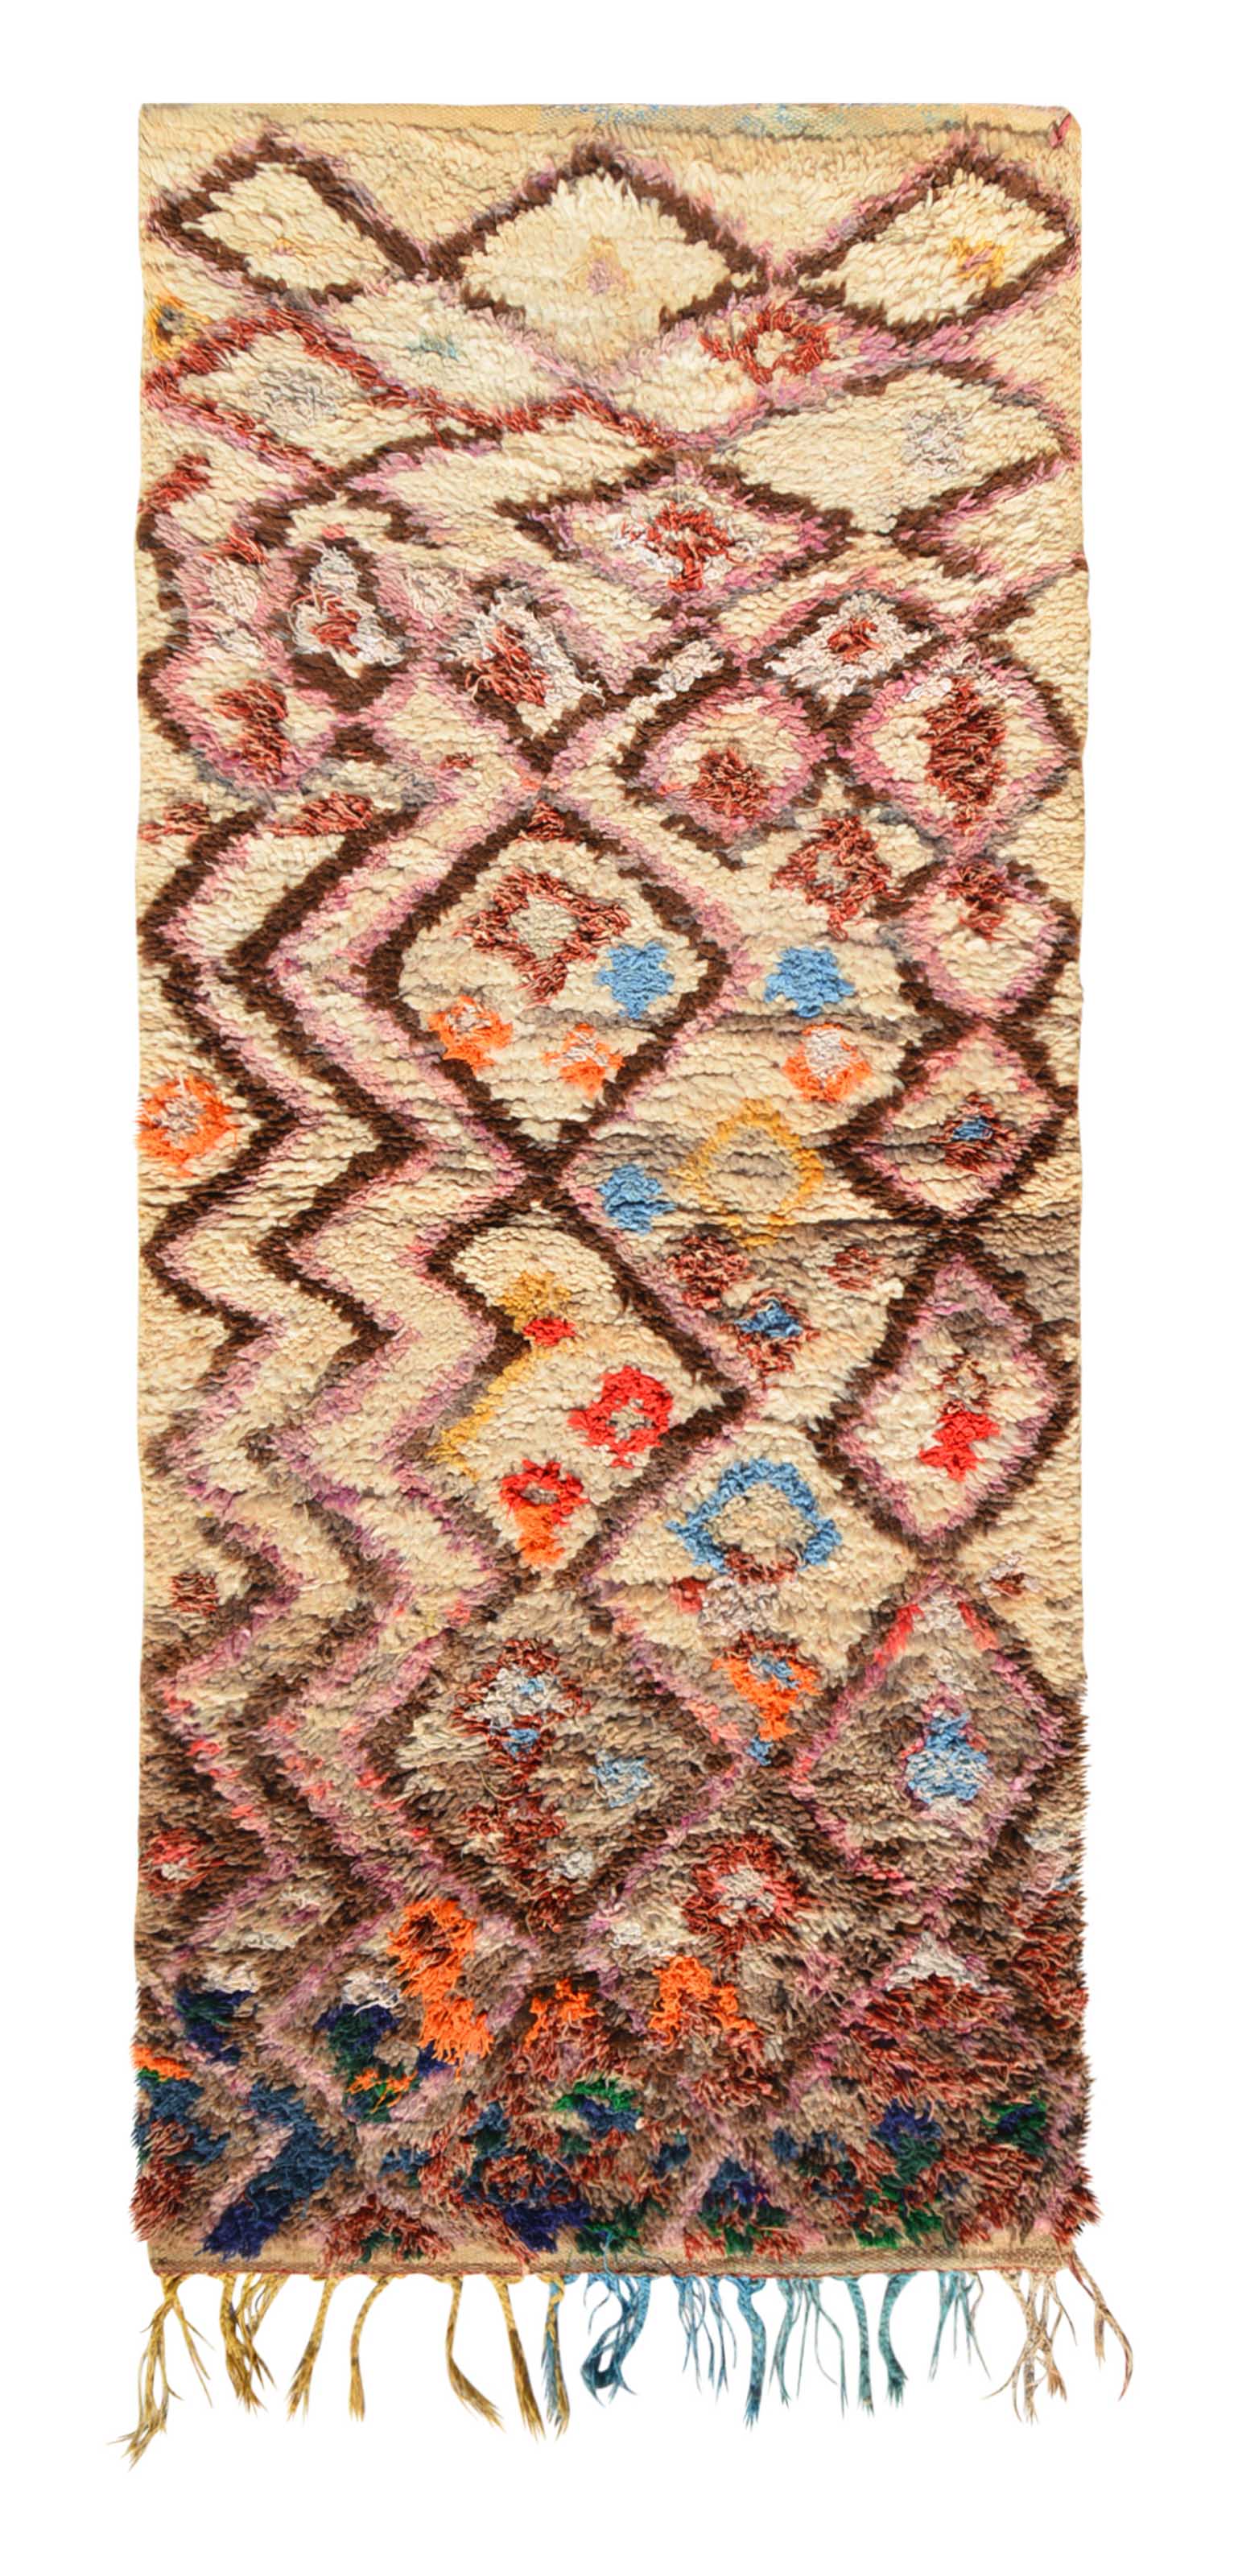 Vintage Moroccan Rug Faded Vintage Rugs | Vintage Moroccan Rug Small Size | Illuminate Collective illuminate collective 